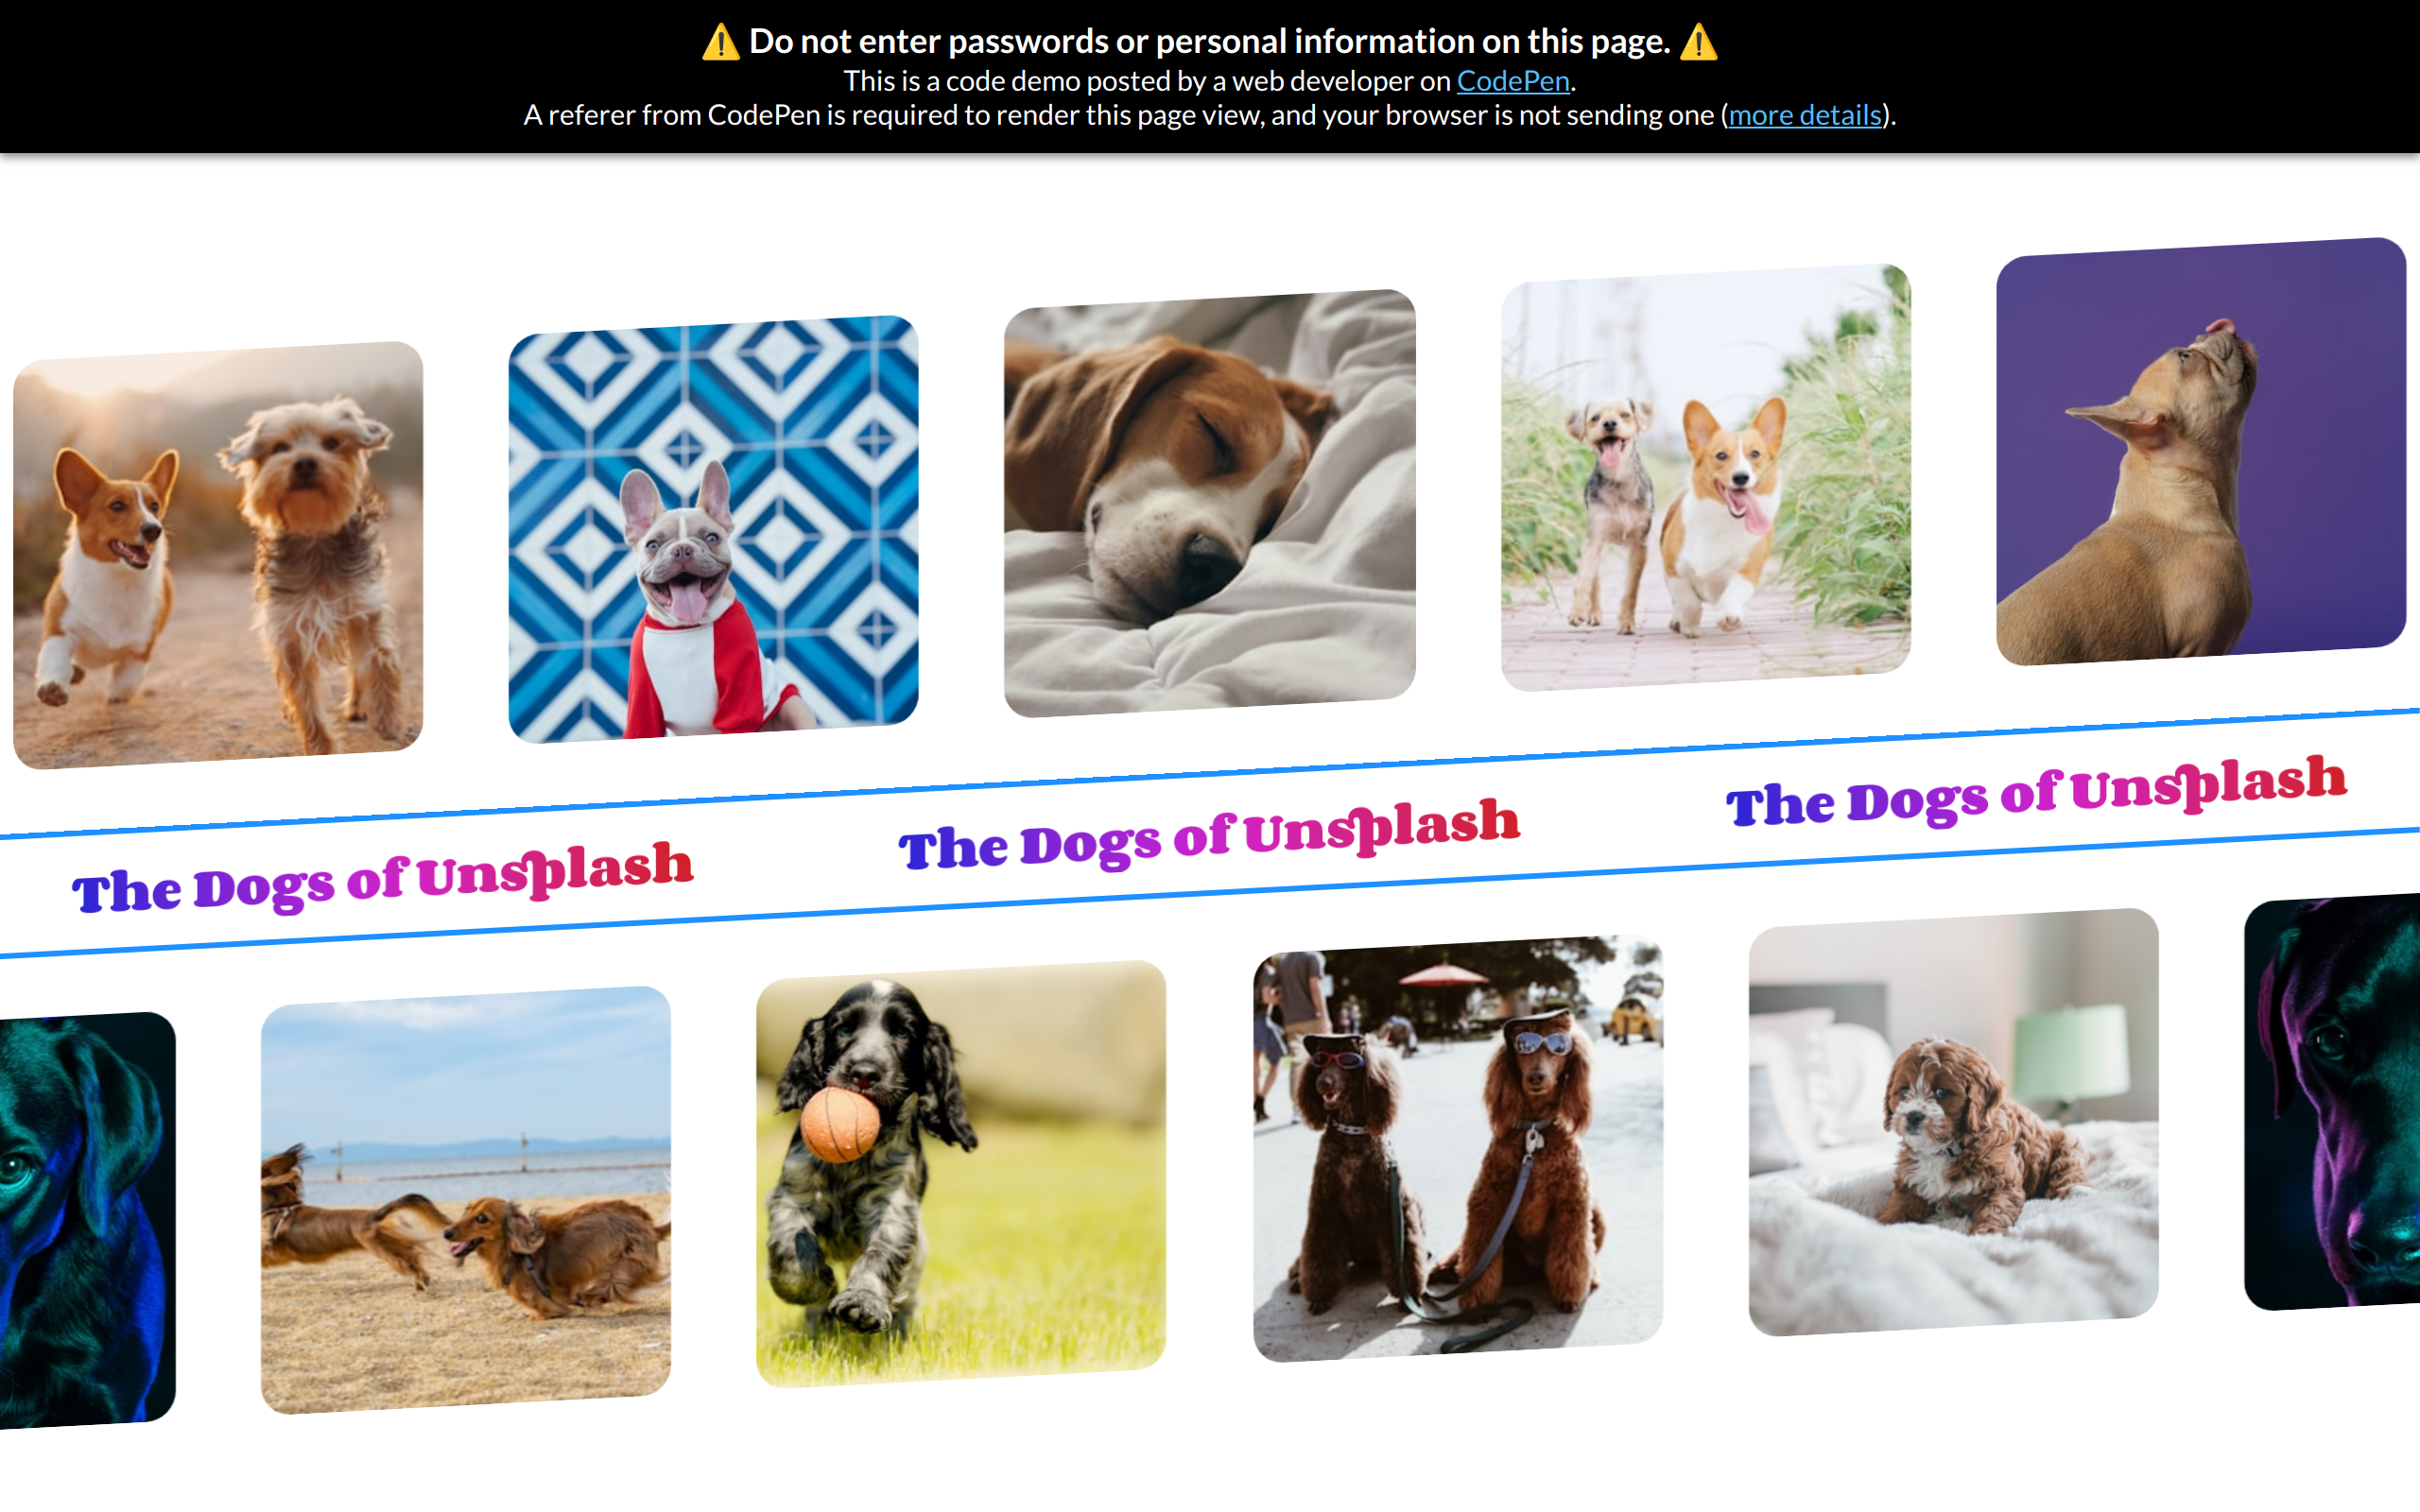 The Dogs of Unsplash